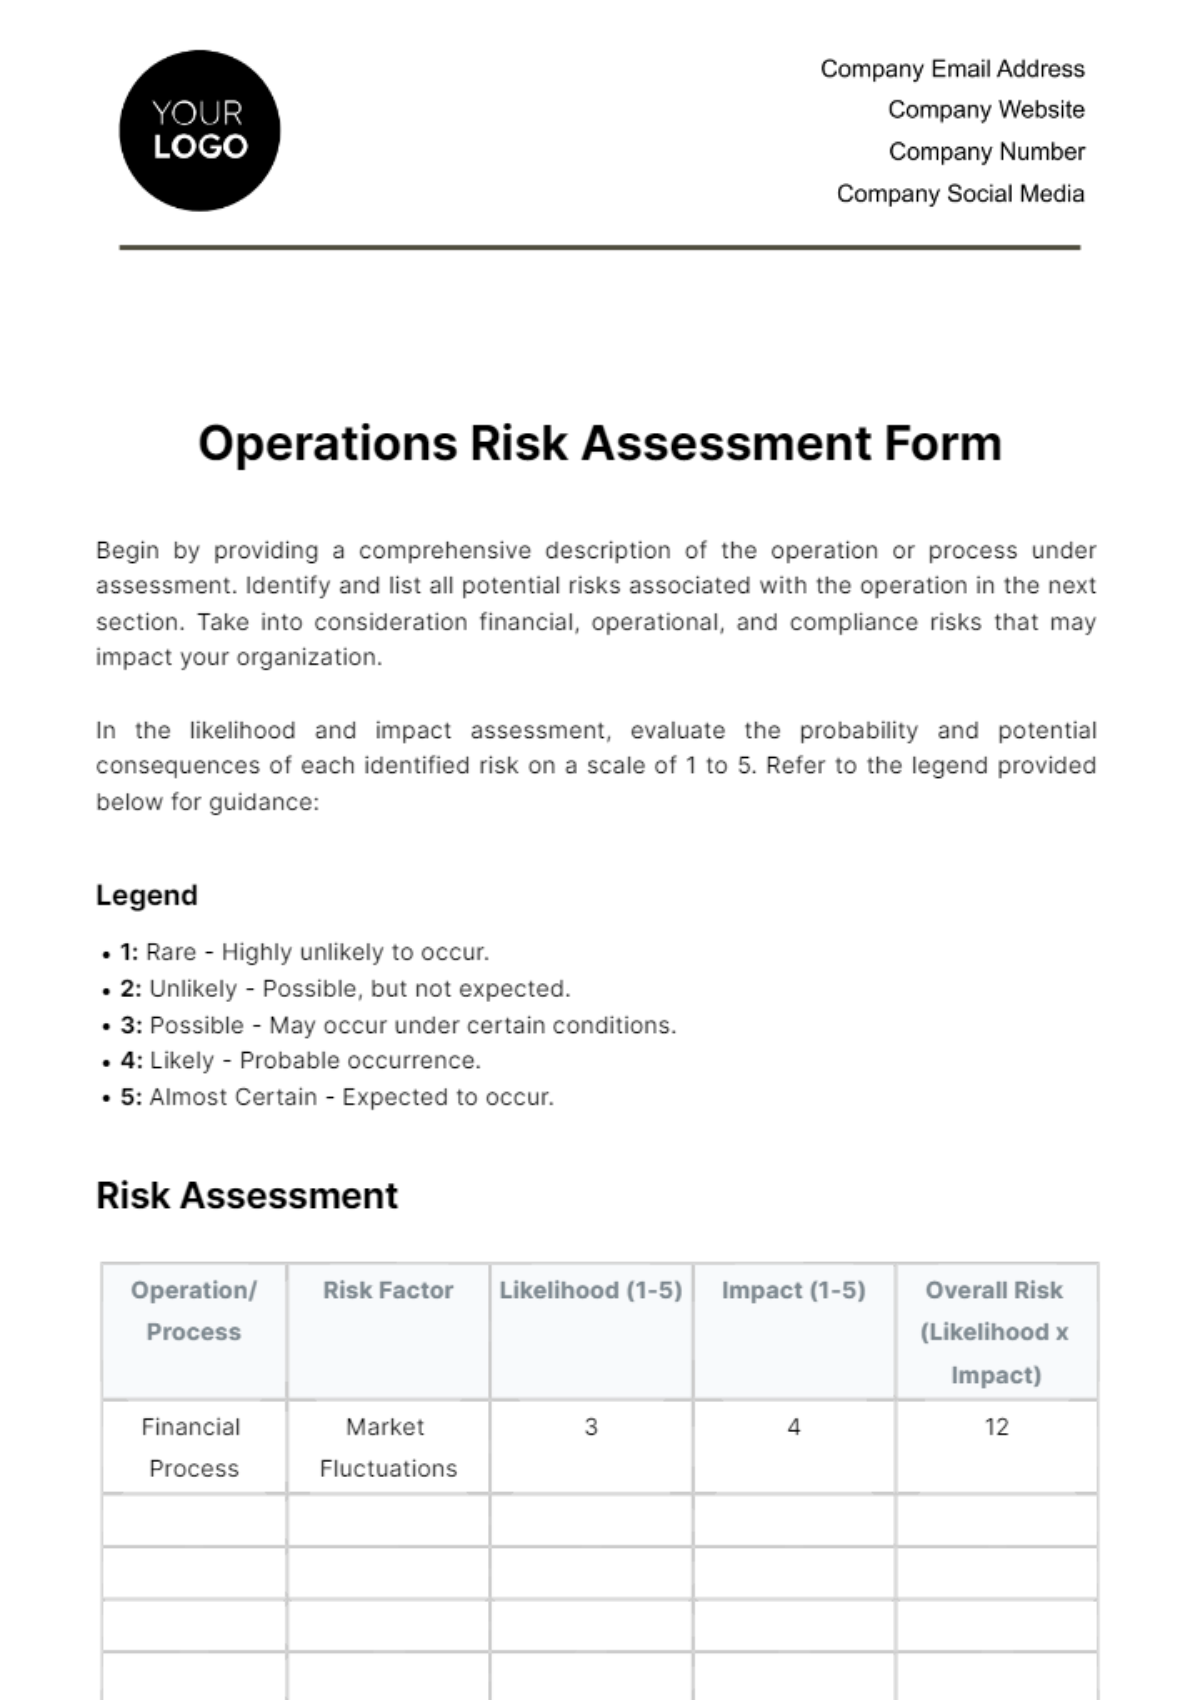 Operations Risk Assessment Form Template